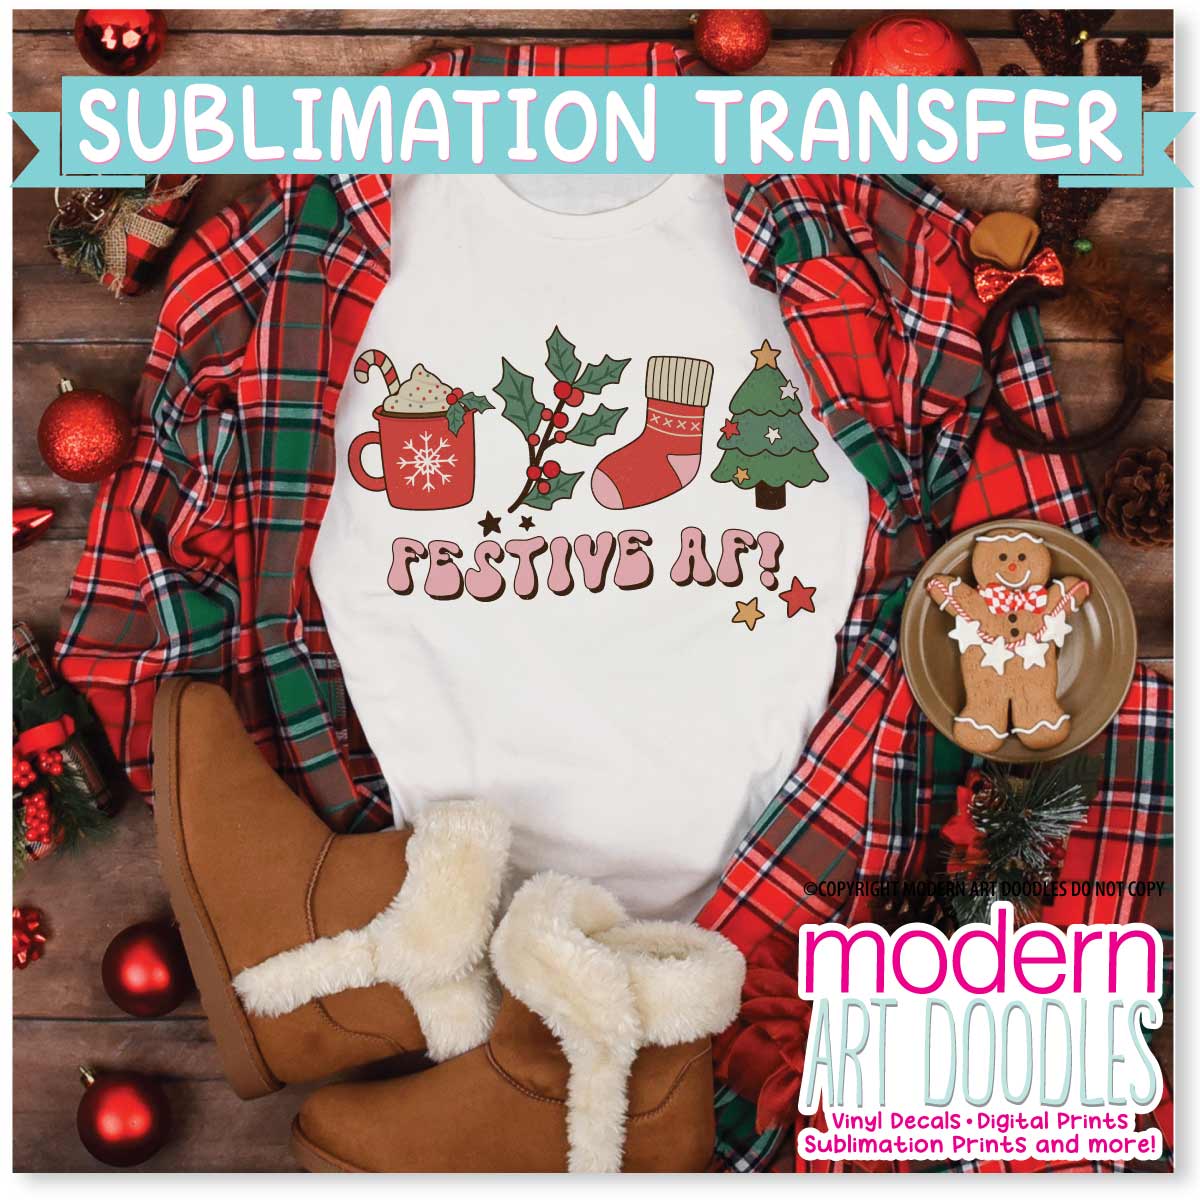 Festive AF Christmas Holiday Sublimation Print - Ready to Press - Ready to Ship